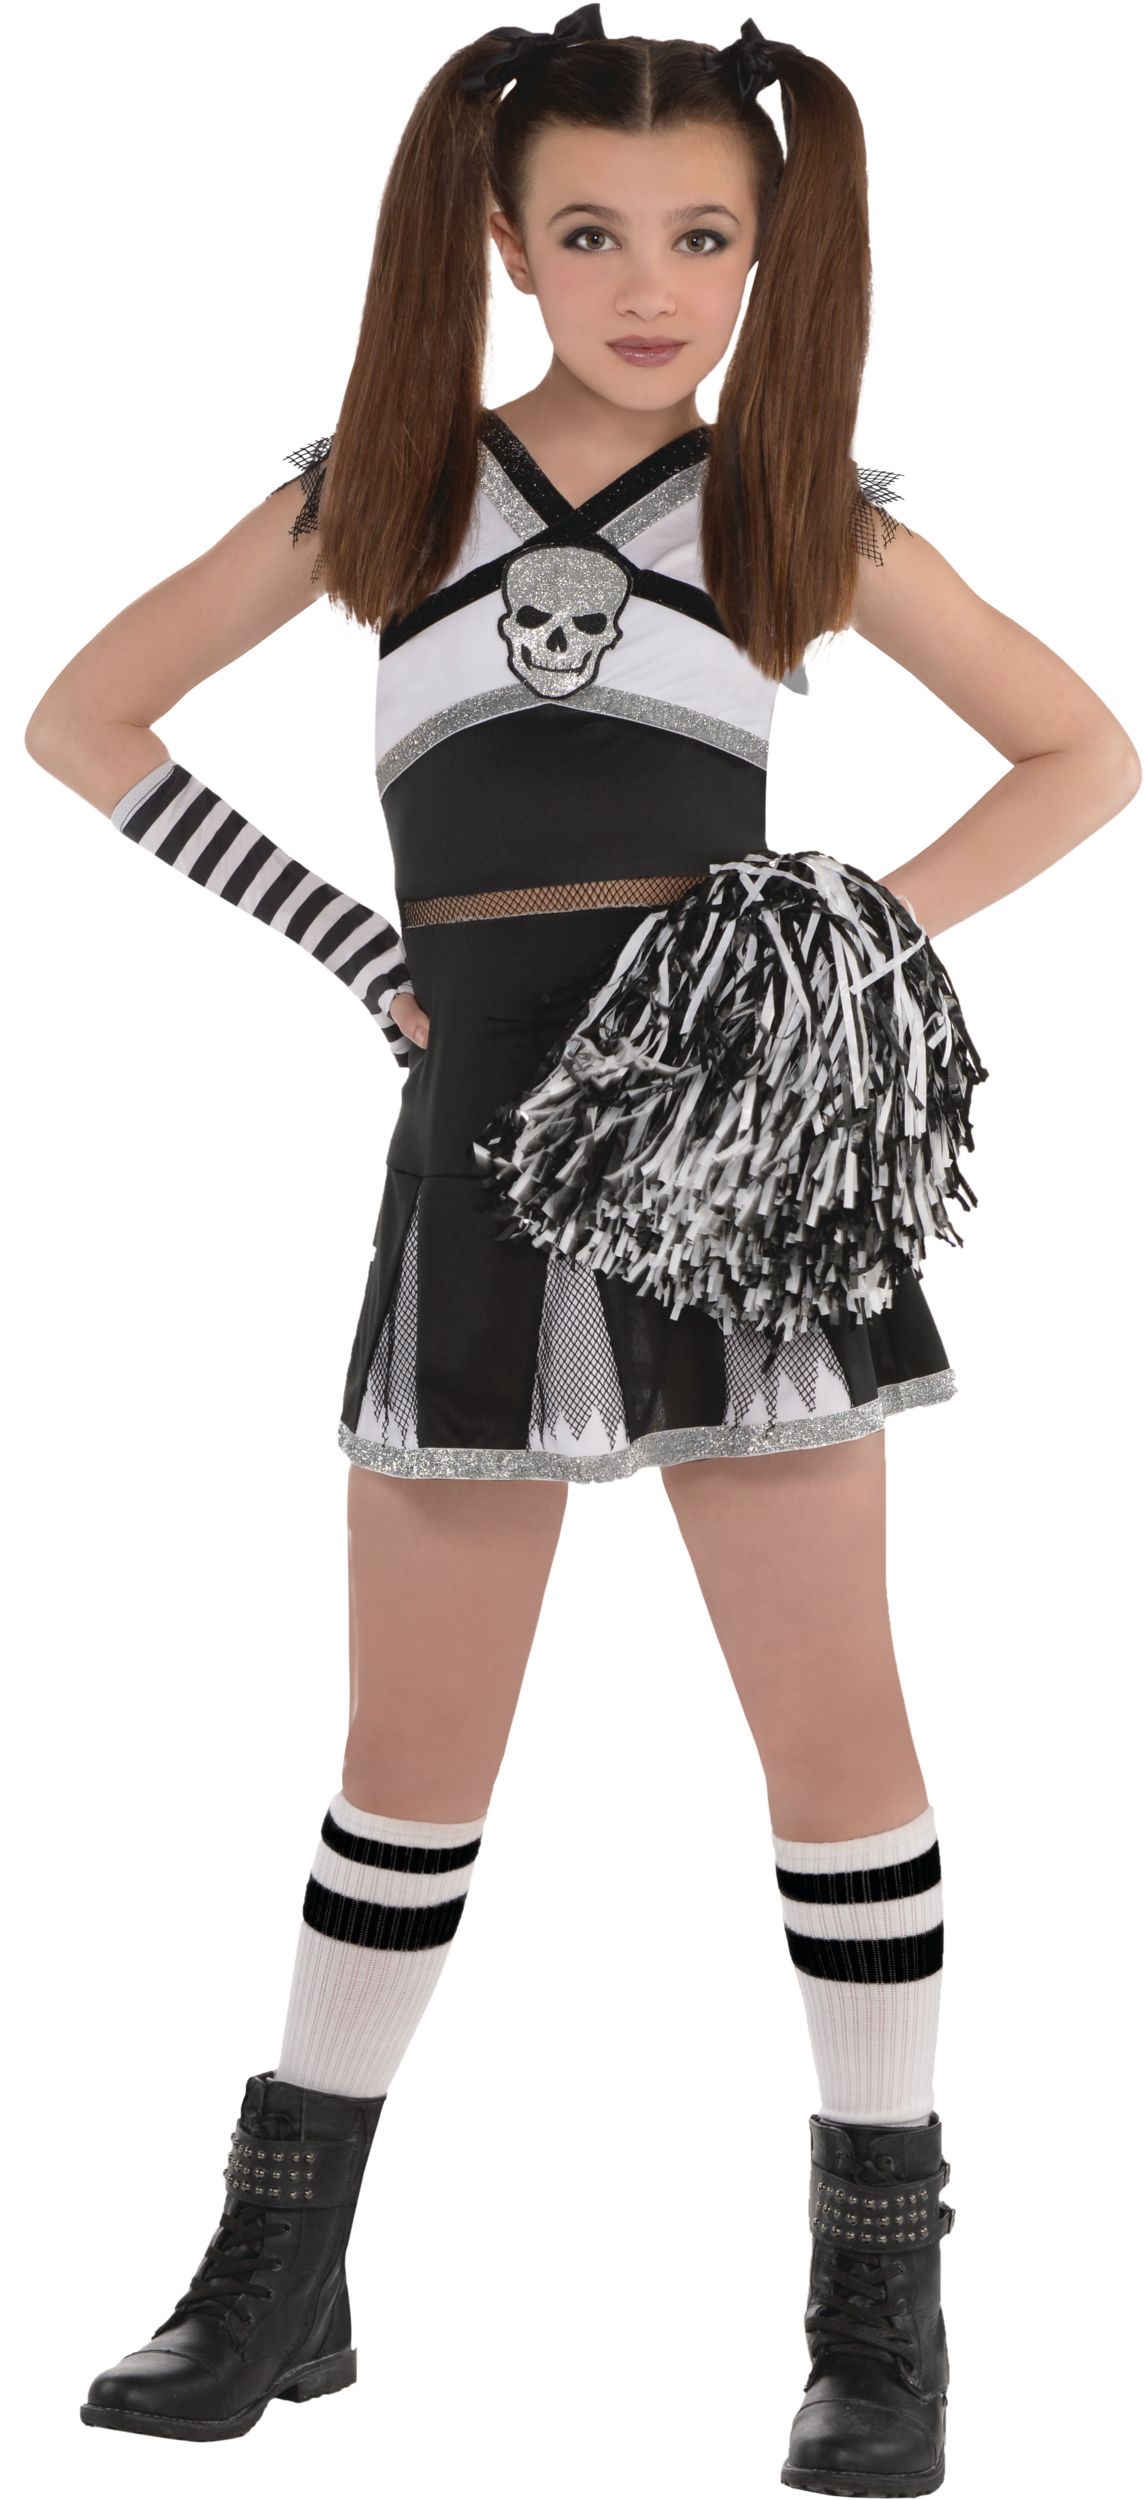 Kids' Punky Jester Black/White Outfit with Shirt/Skirt/Leggings/Headband Halloween  Costume, Assorted Sizes